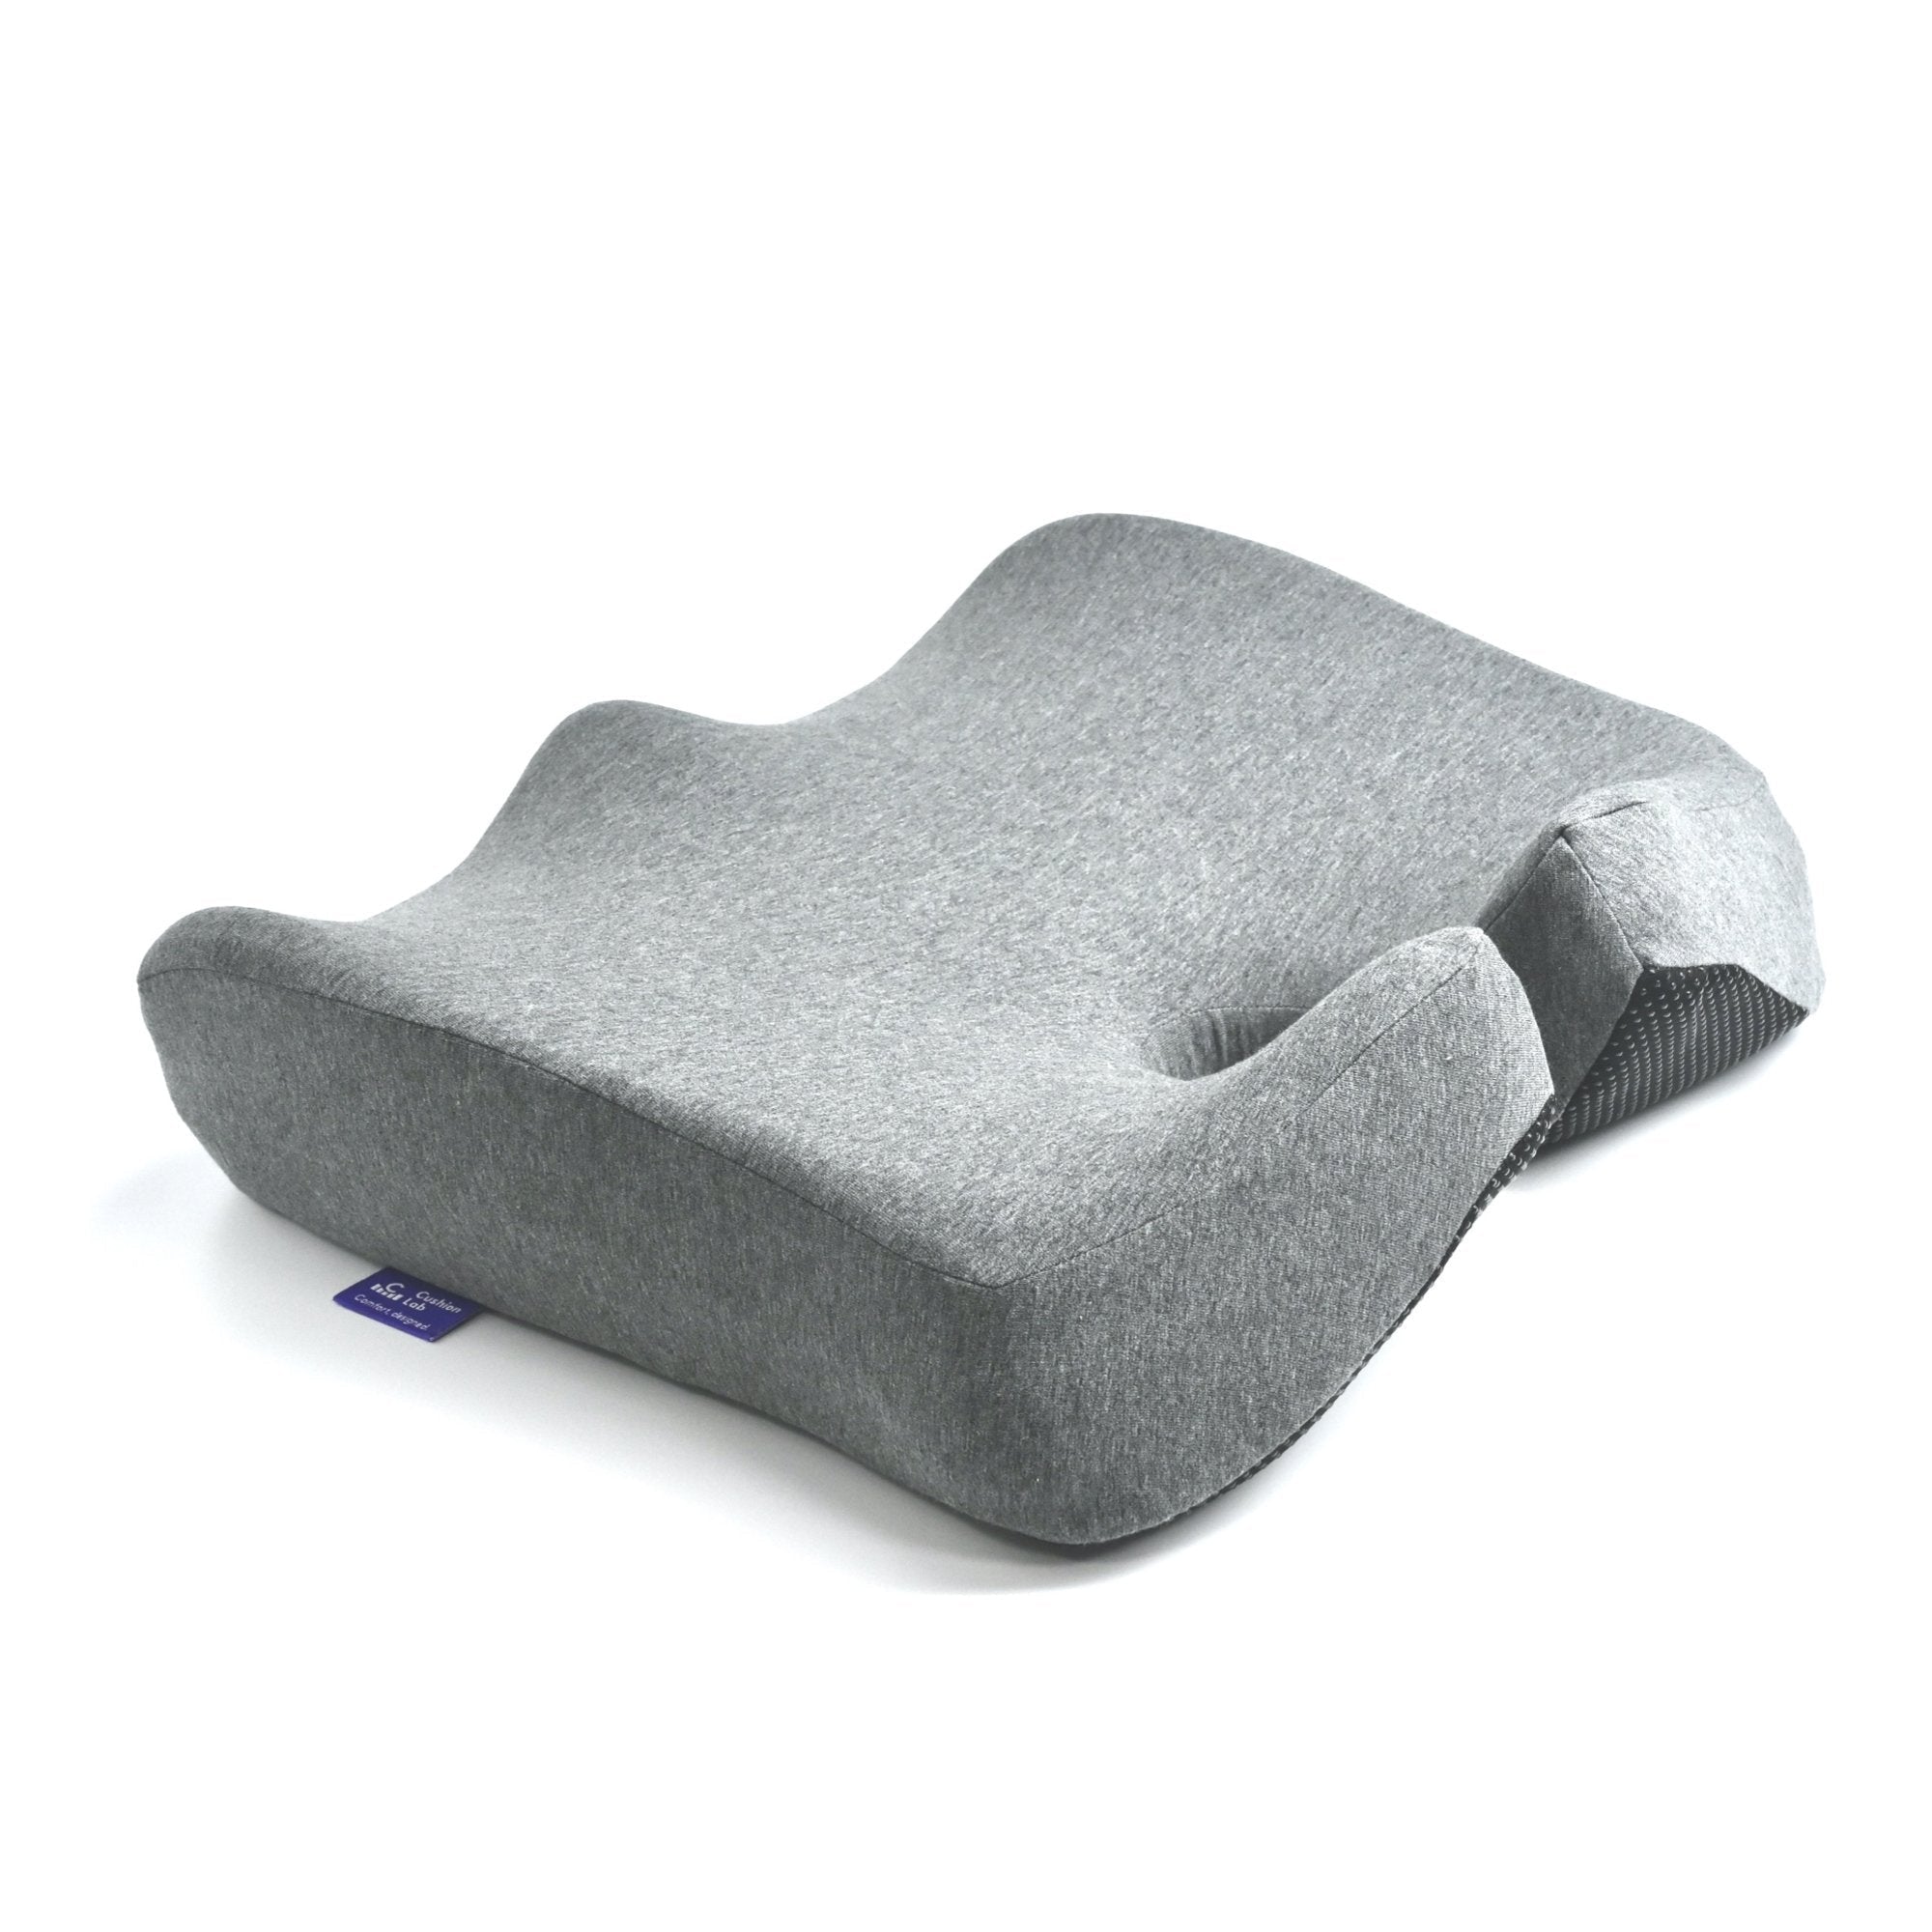  LAMPPE Pressure Relief Cushion, Coccyx Pillow for